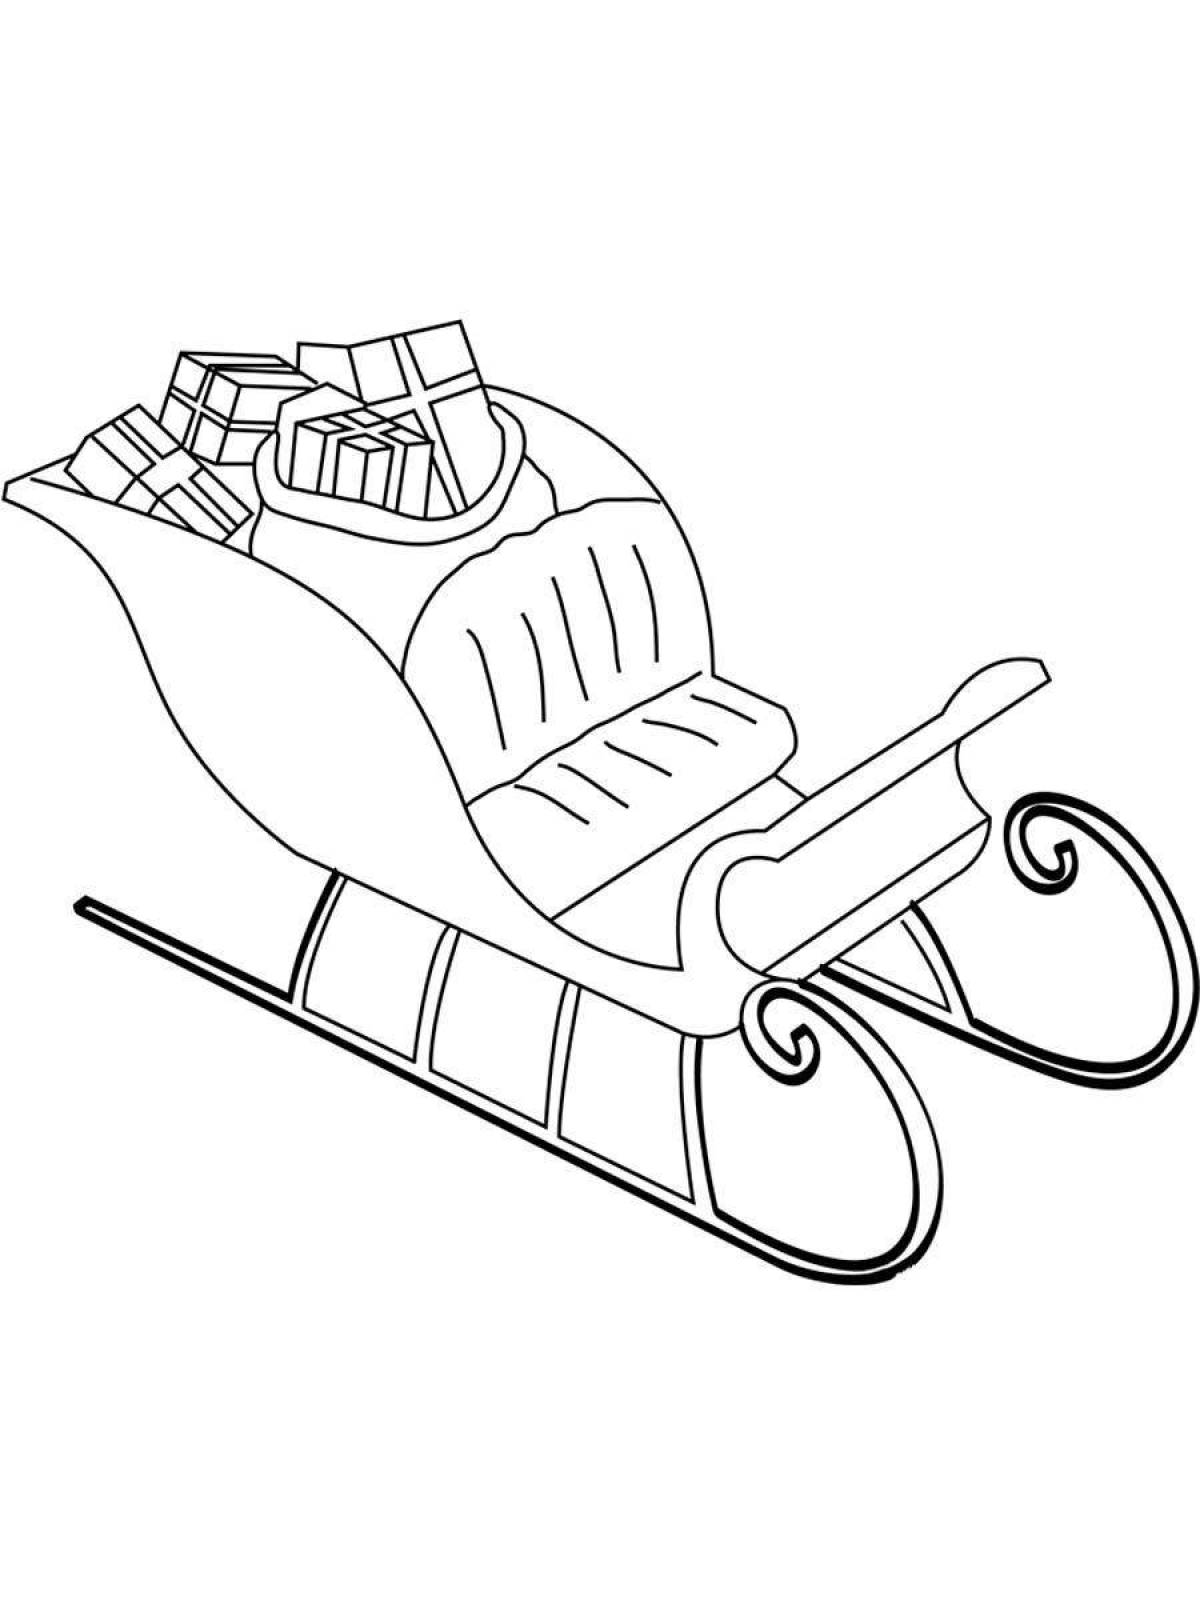 Elegant sleigh coloring pages